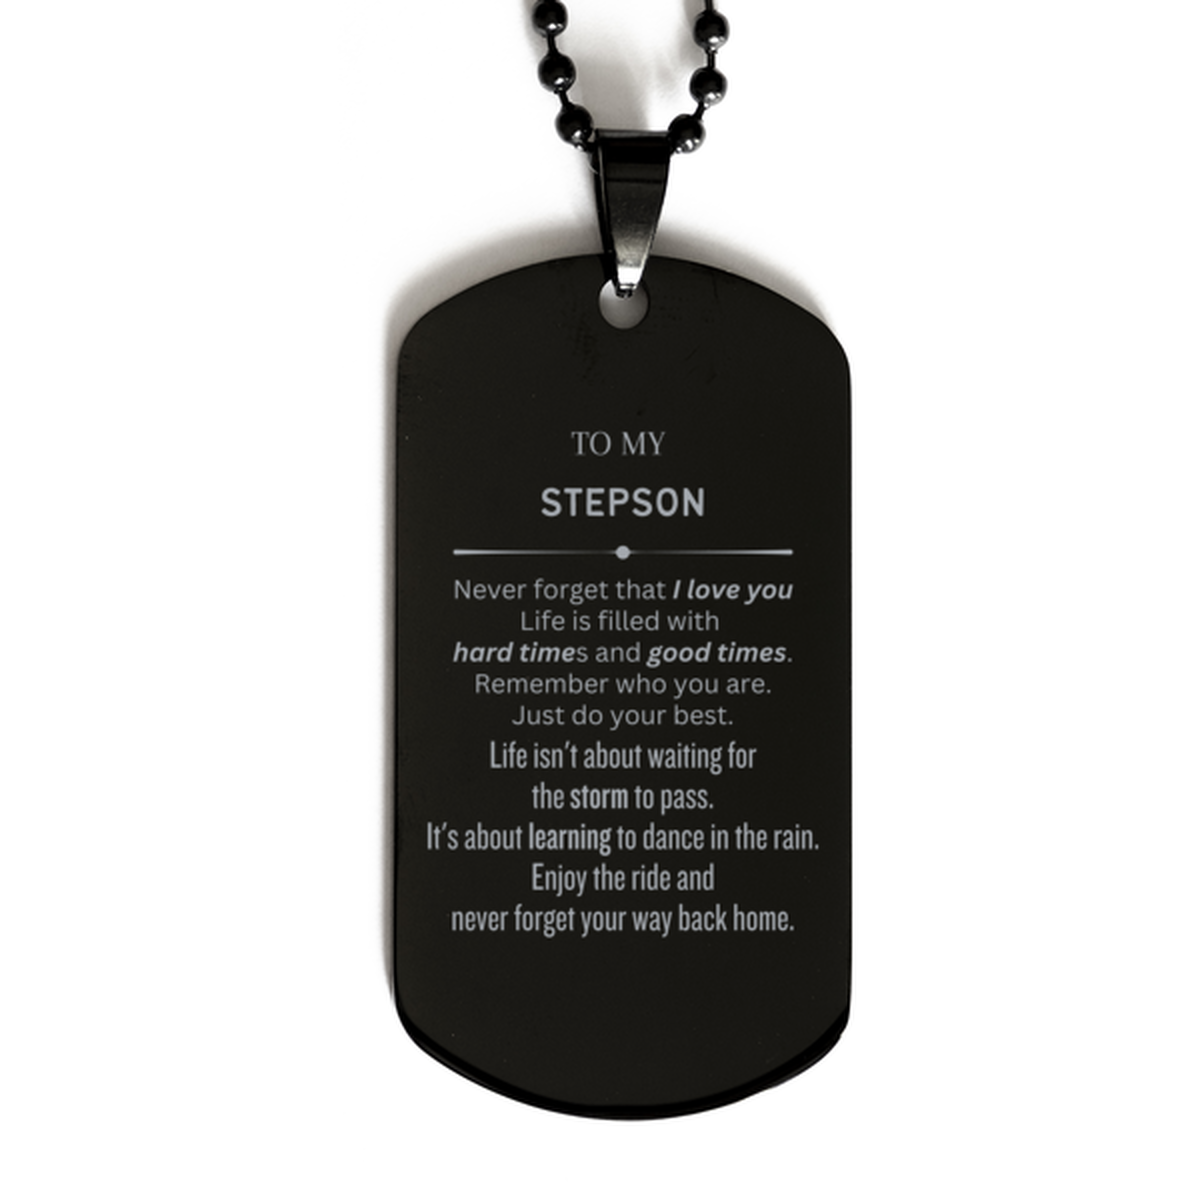 Christmas Stepson Black Dog Tag Gifts, To My Stepson Birthday Thank You Gifts For Stepson, Graduation Unique Gifts For Stepson To My Stepson Never forget that I love you life is filled with hard times and good times. Remember who you are. Just do your bes